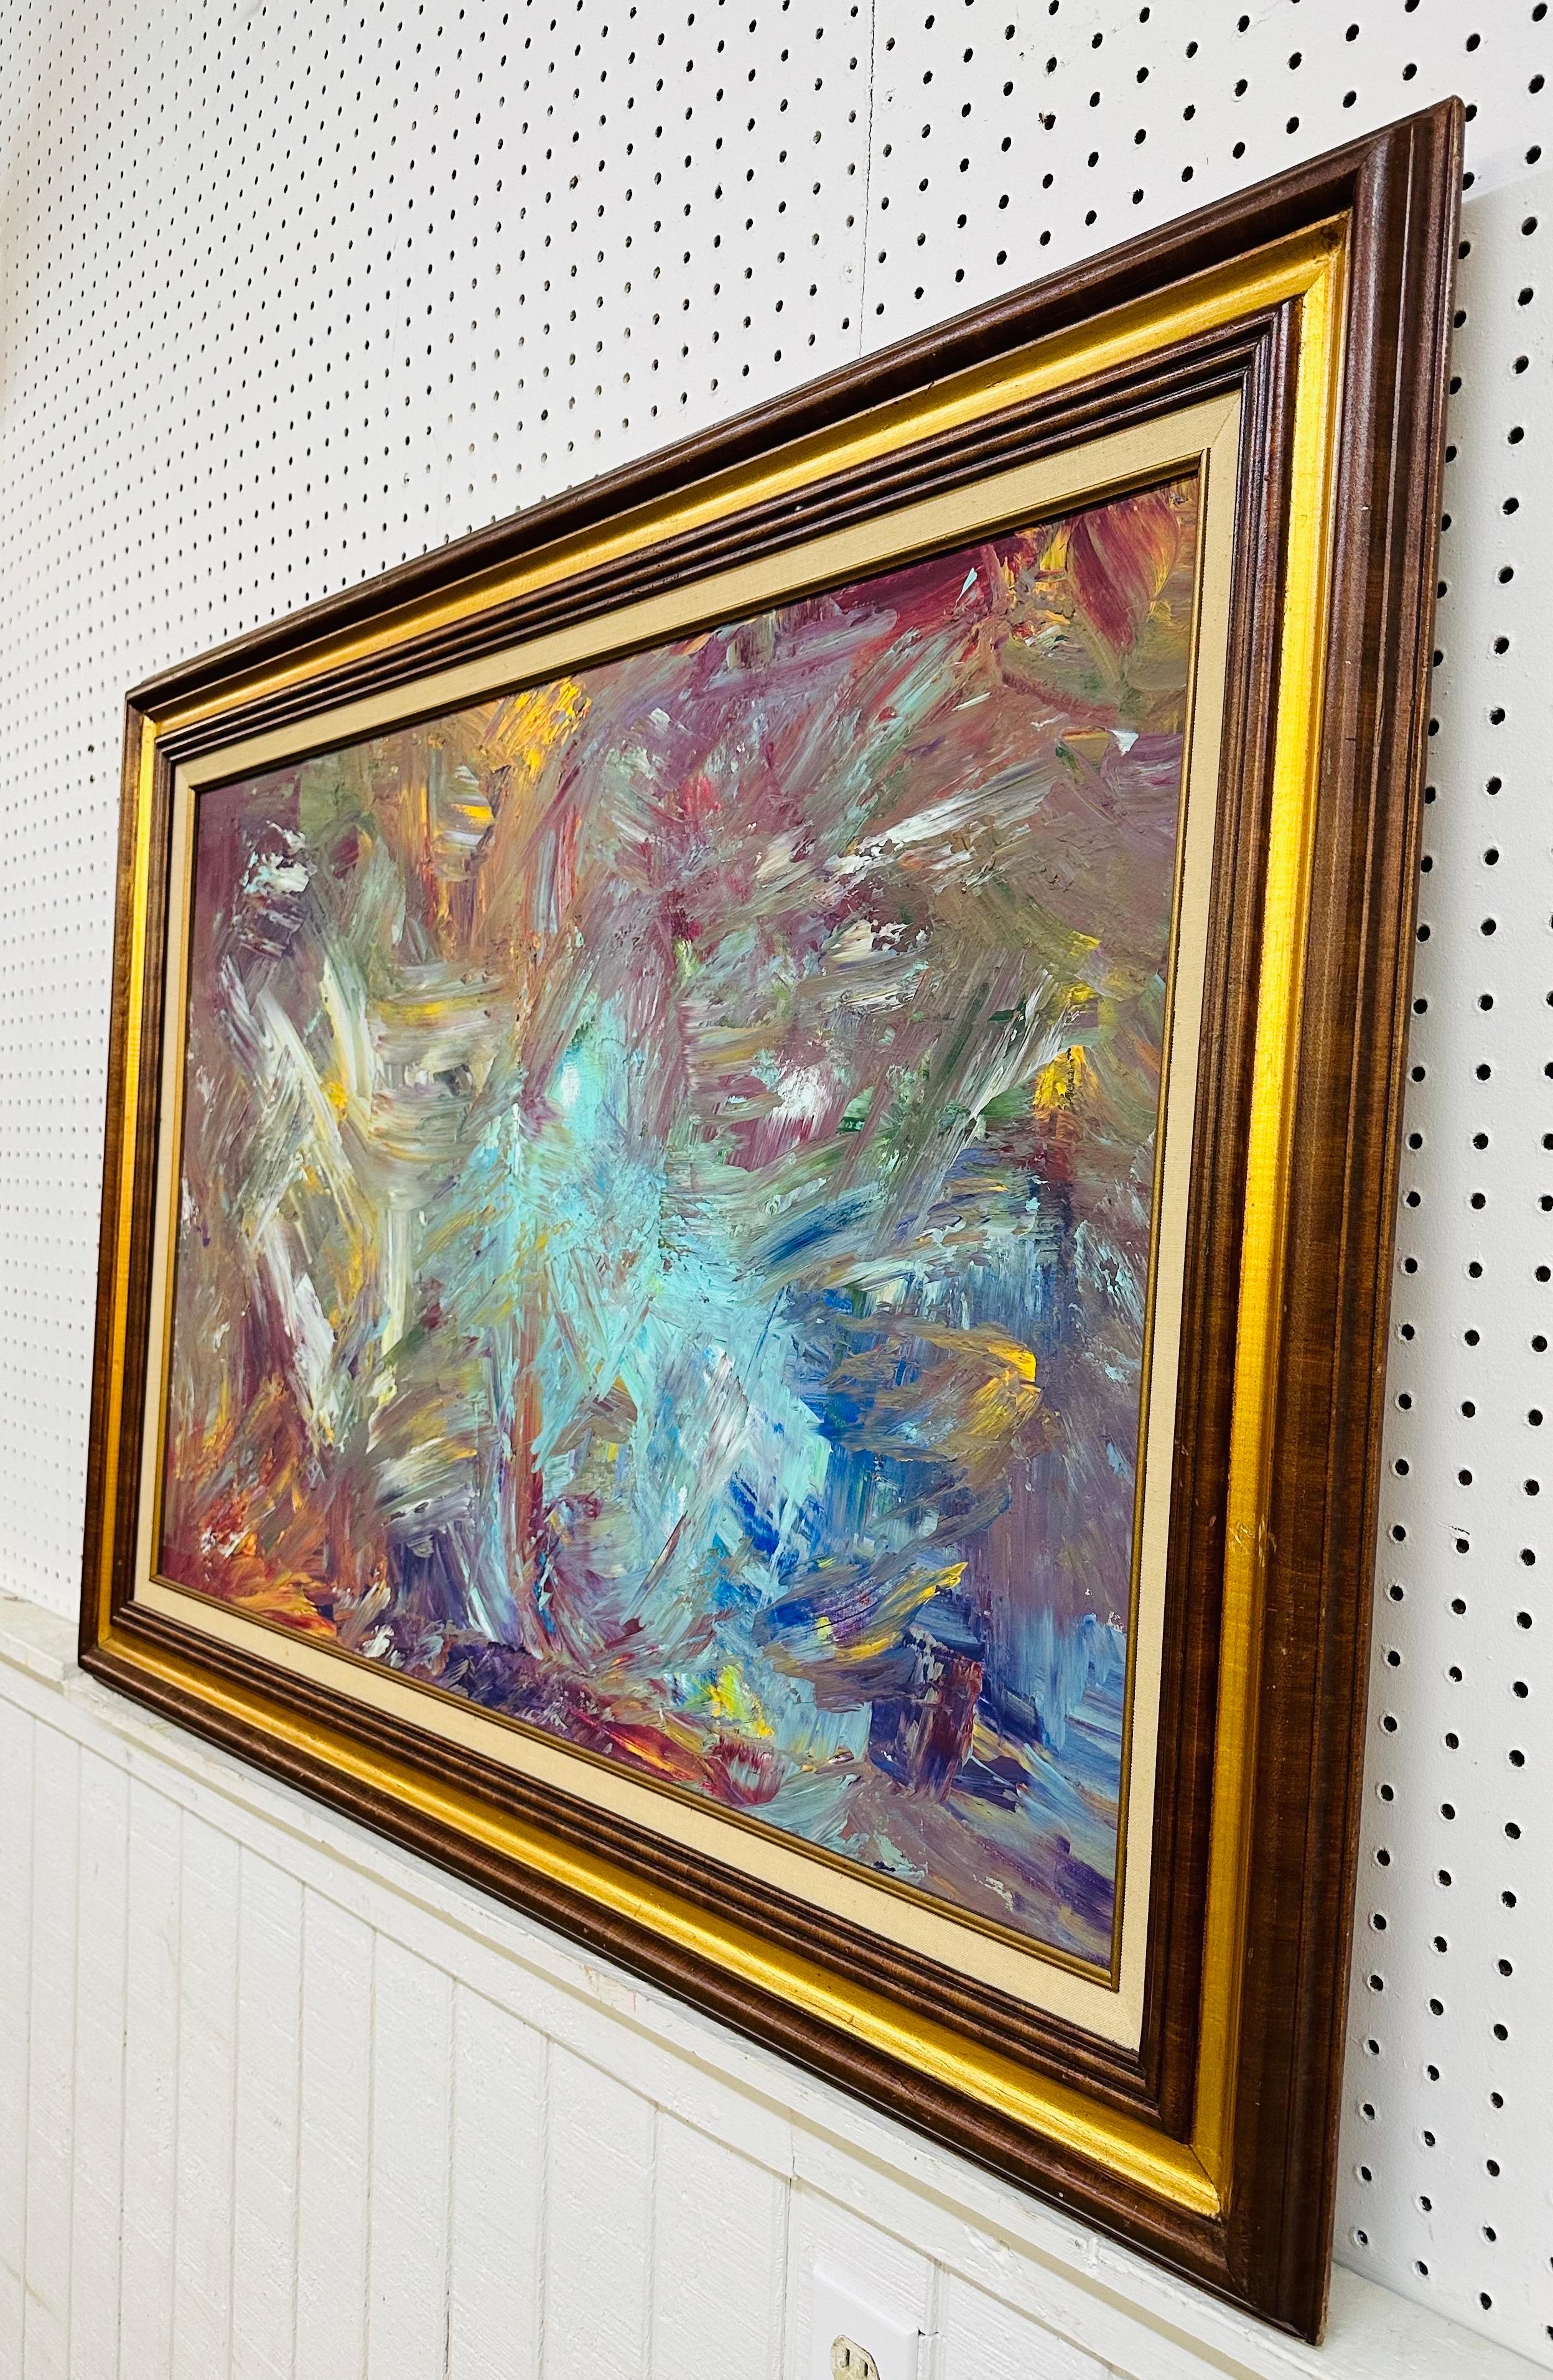 This listing is for a Modern Expressionist Abstract Painting. Featuring a vintage gold frame, original expressionist style abstract art with a mixture of colors, and a wire on the back for hanging. This is an exceptional piece by artist Mullin.